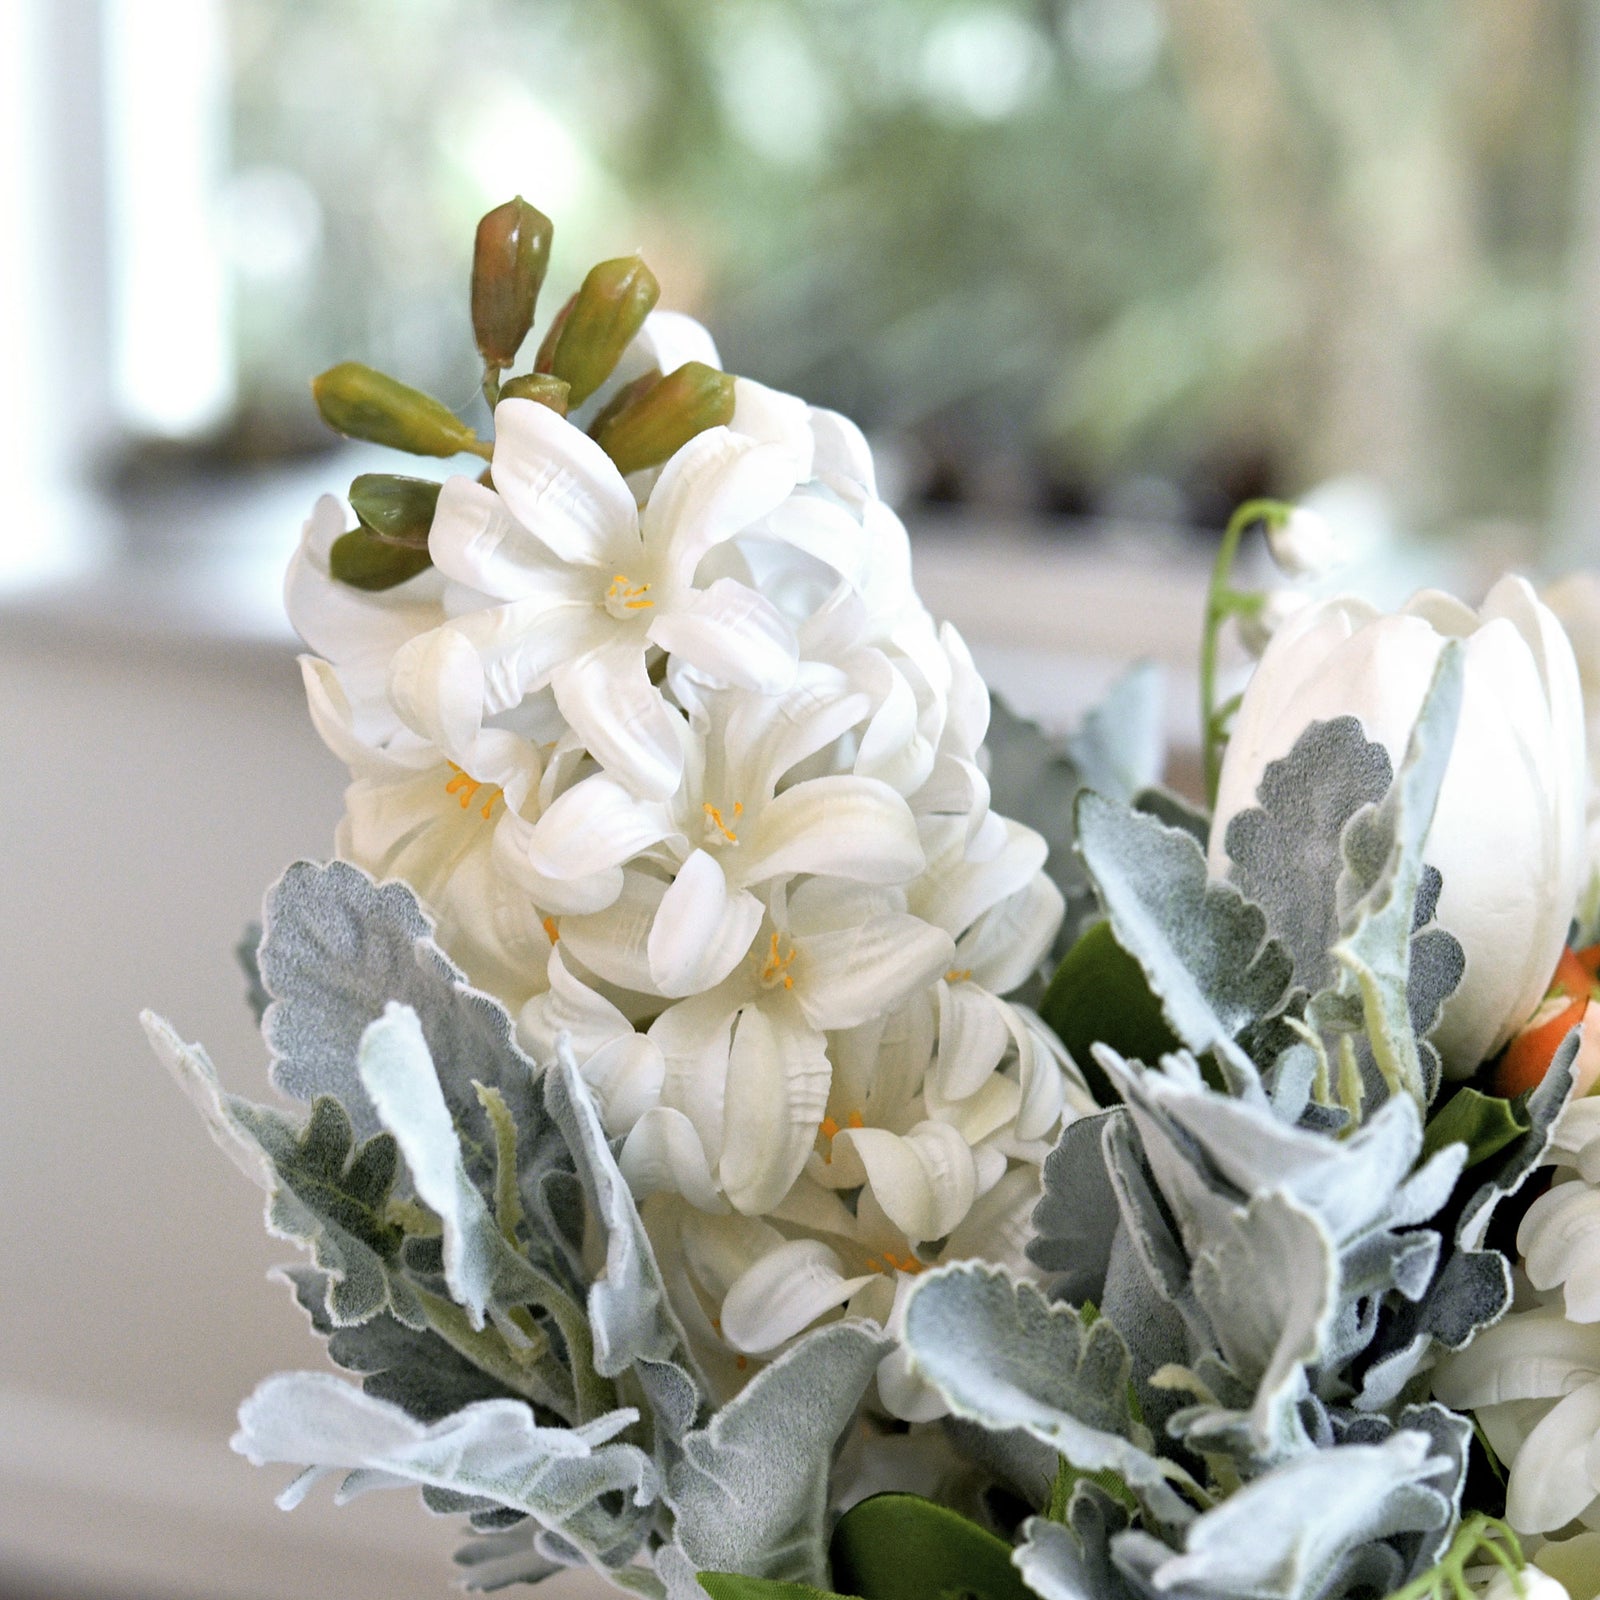 Real Touch Hyacinth (Blossom White) Artificial Flowers ‘Petals Feel and Look like Fresh Hyacinth' Wedding, Home Decor, Arrangement 2 Stems